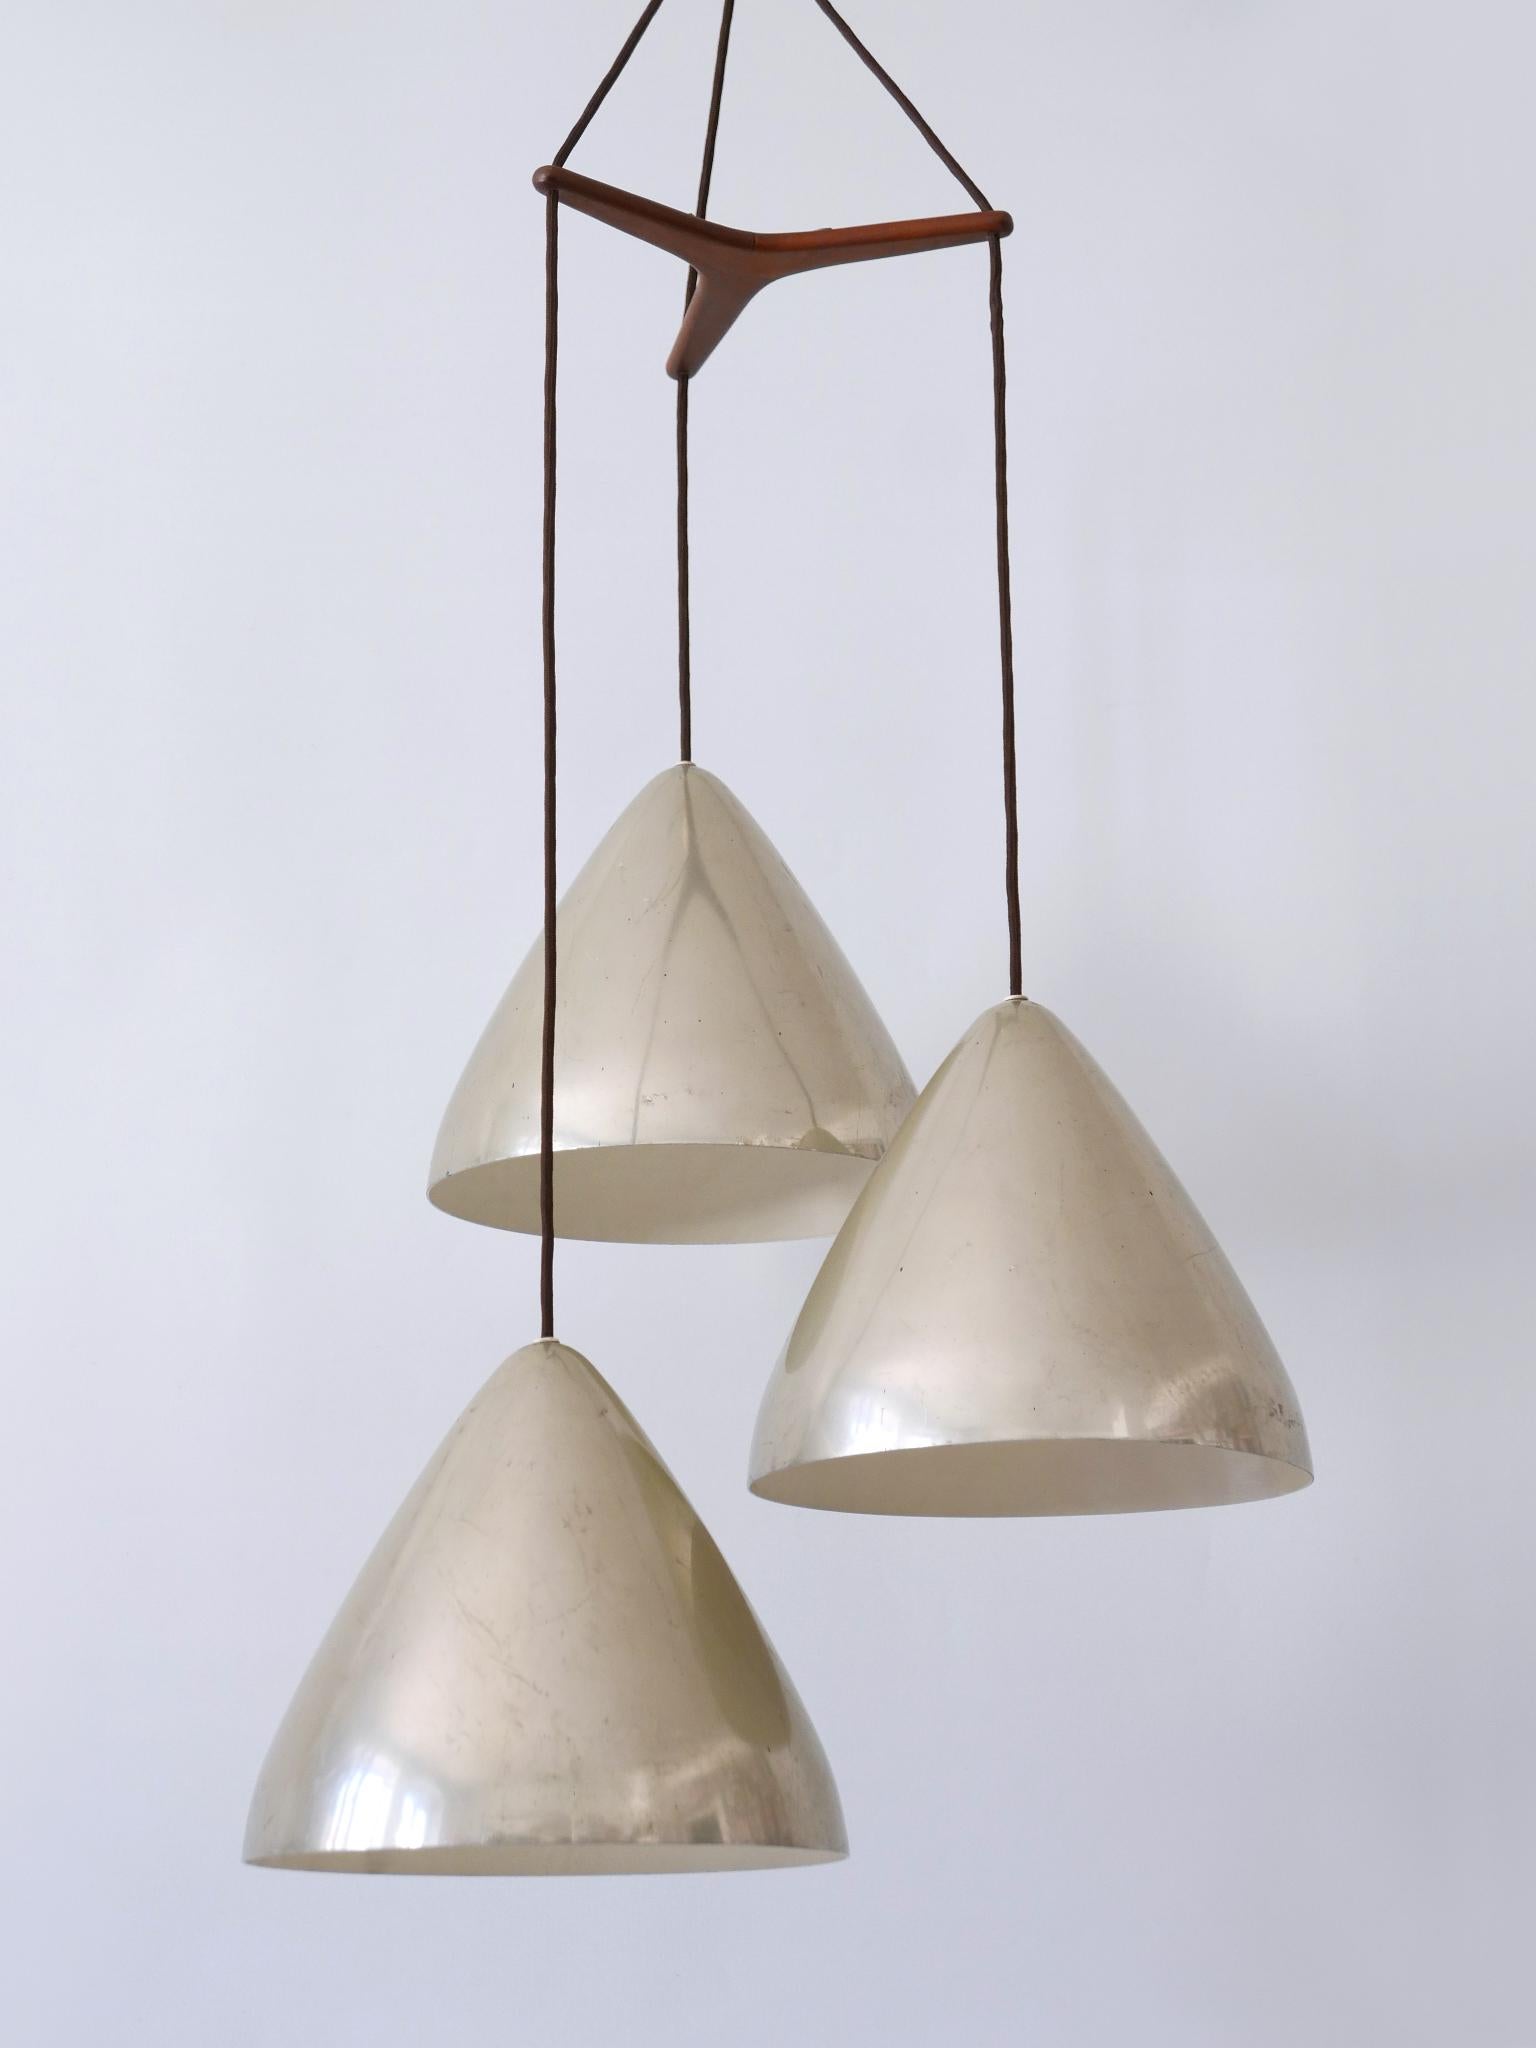 Elegant Cascading Pendant Lamp by Lisa Johansson-Pape for Orno Finland 1960s For Sale 2